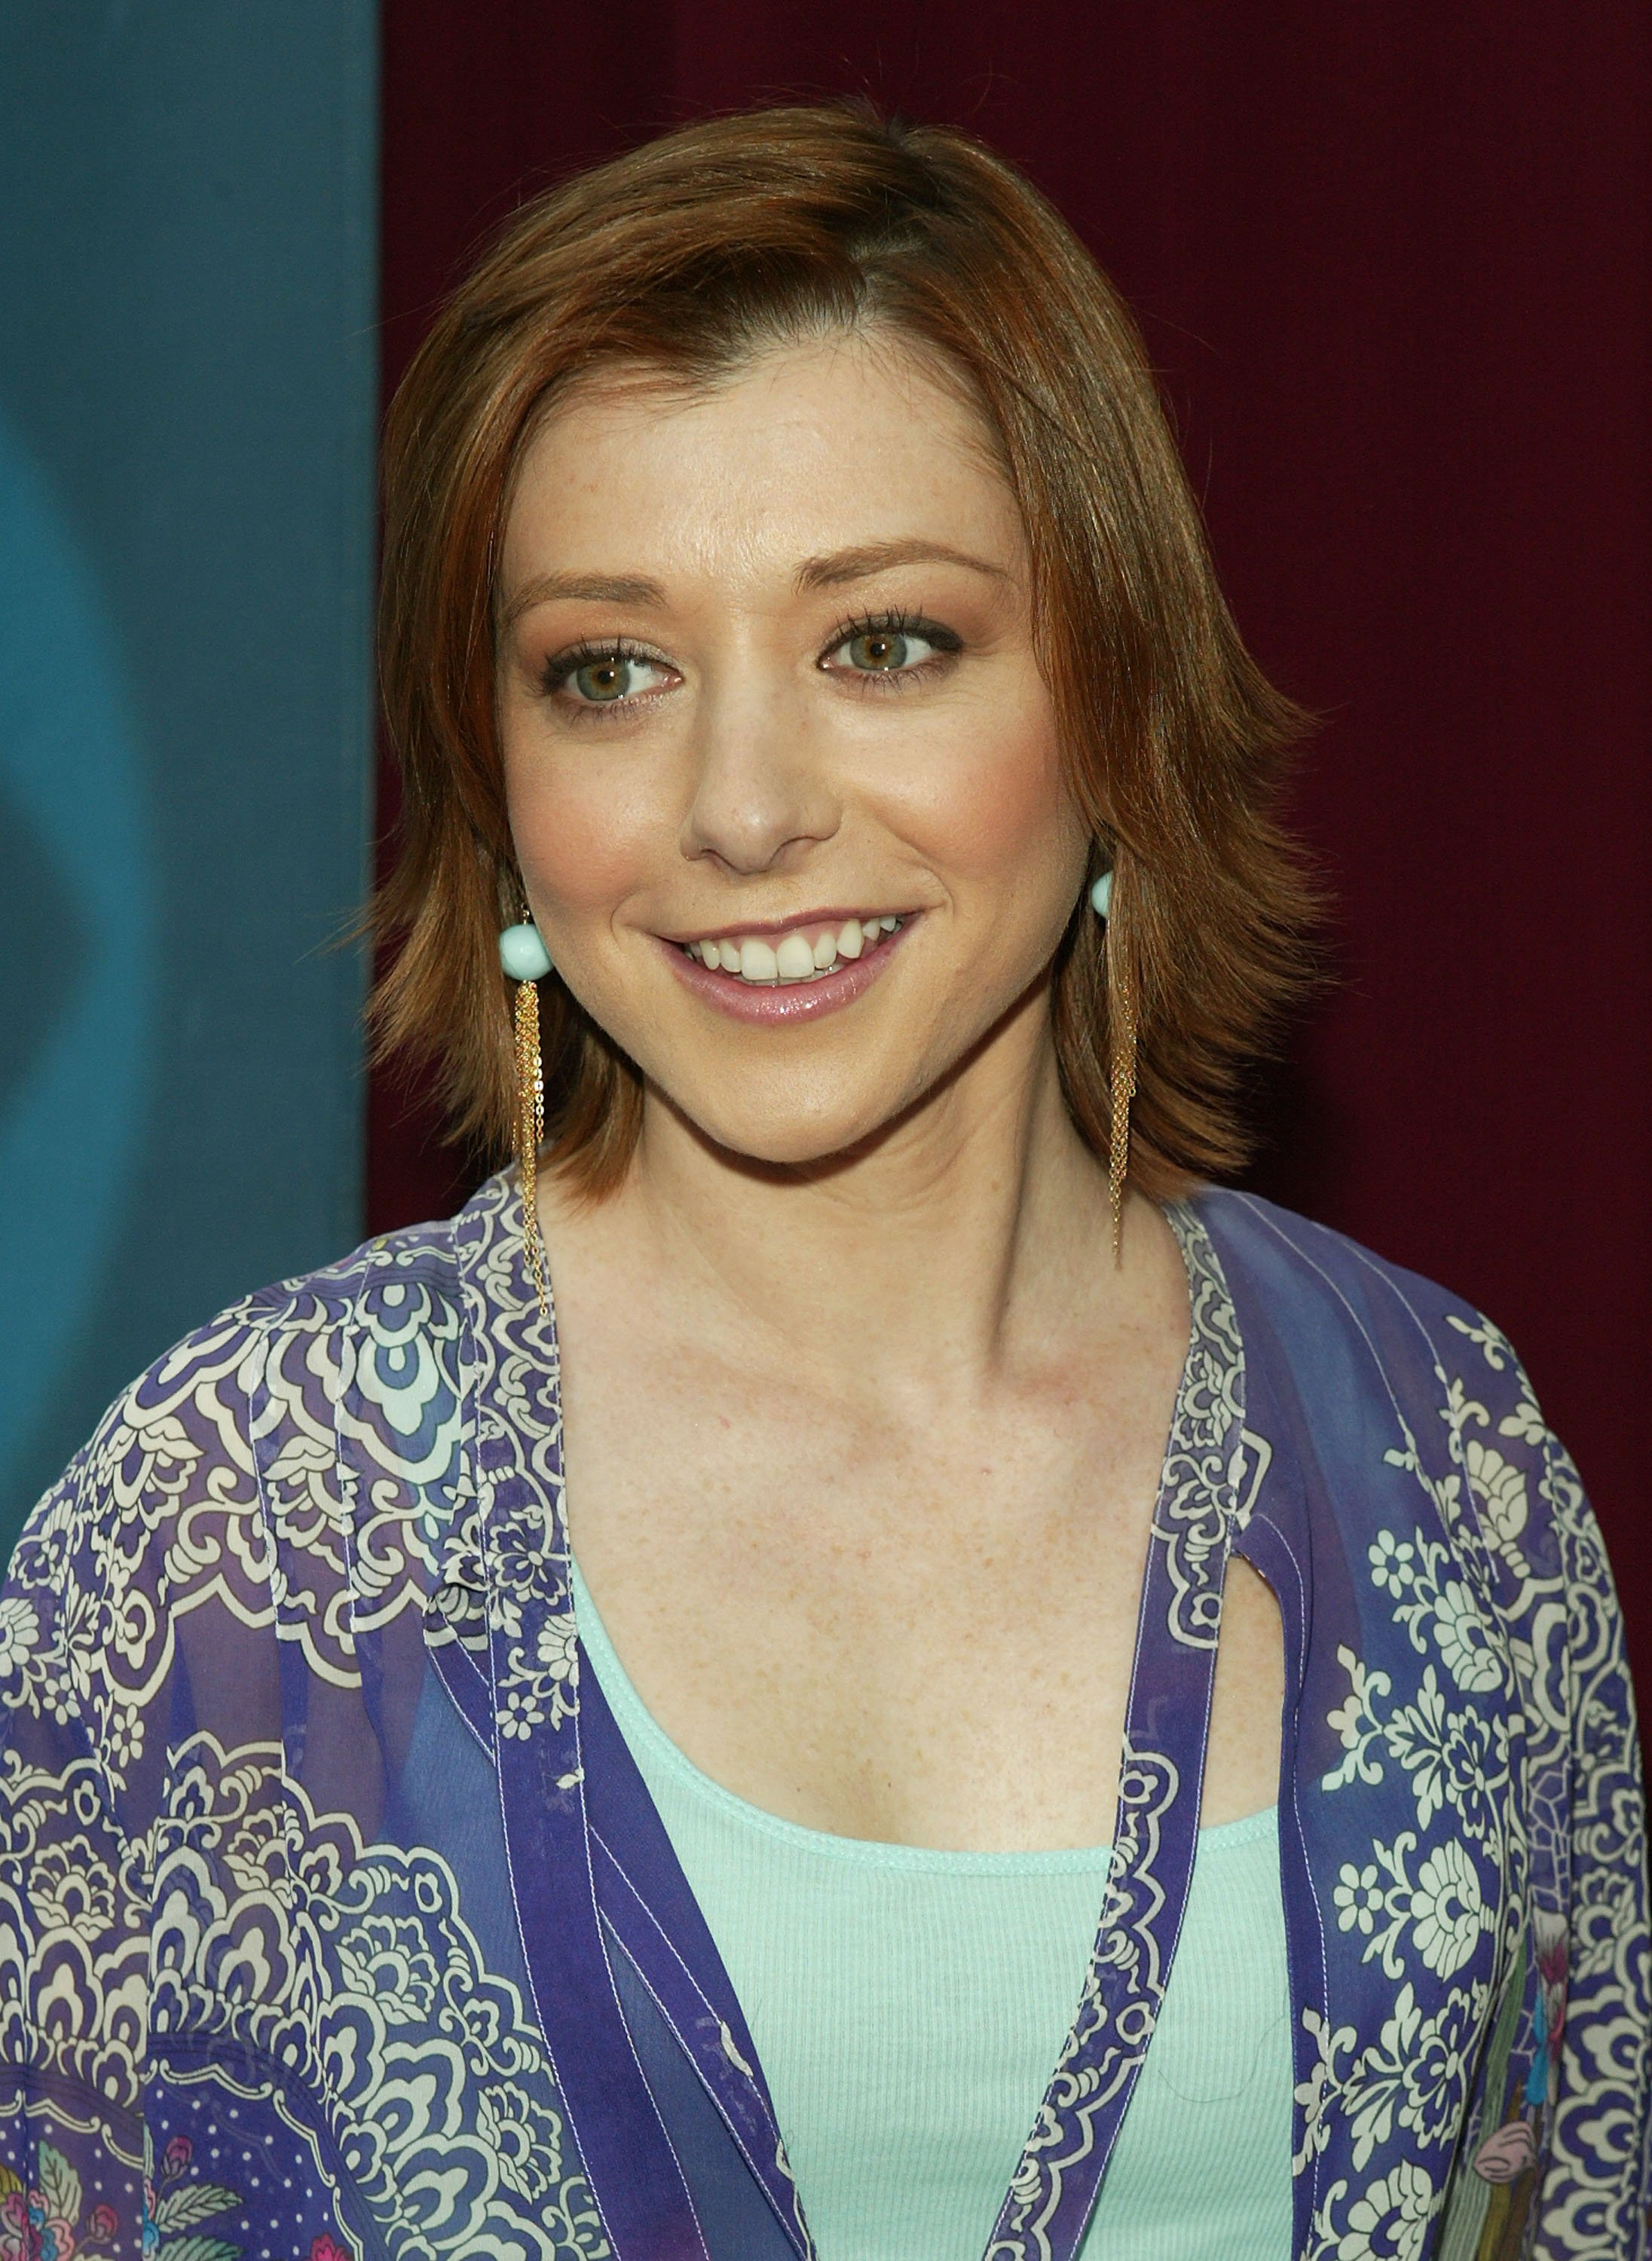 Alyson Hannigan attends the CBS upfront in May 2005 in New York City | Photo: Getty Images